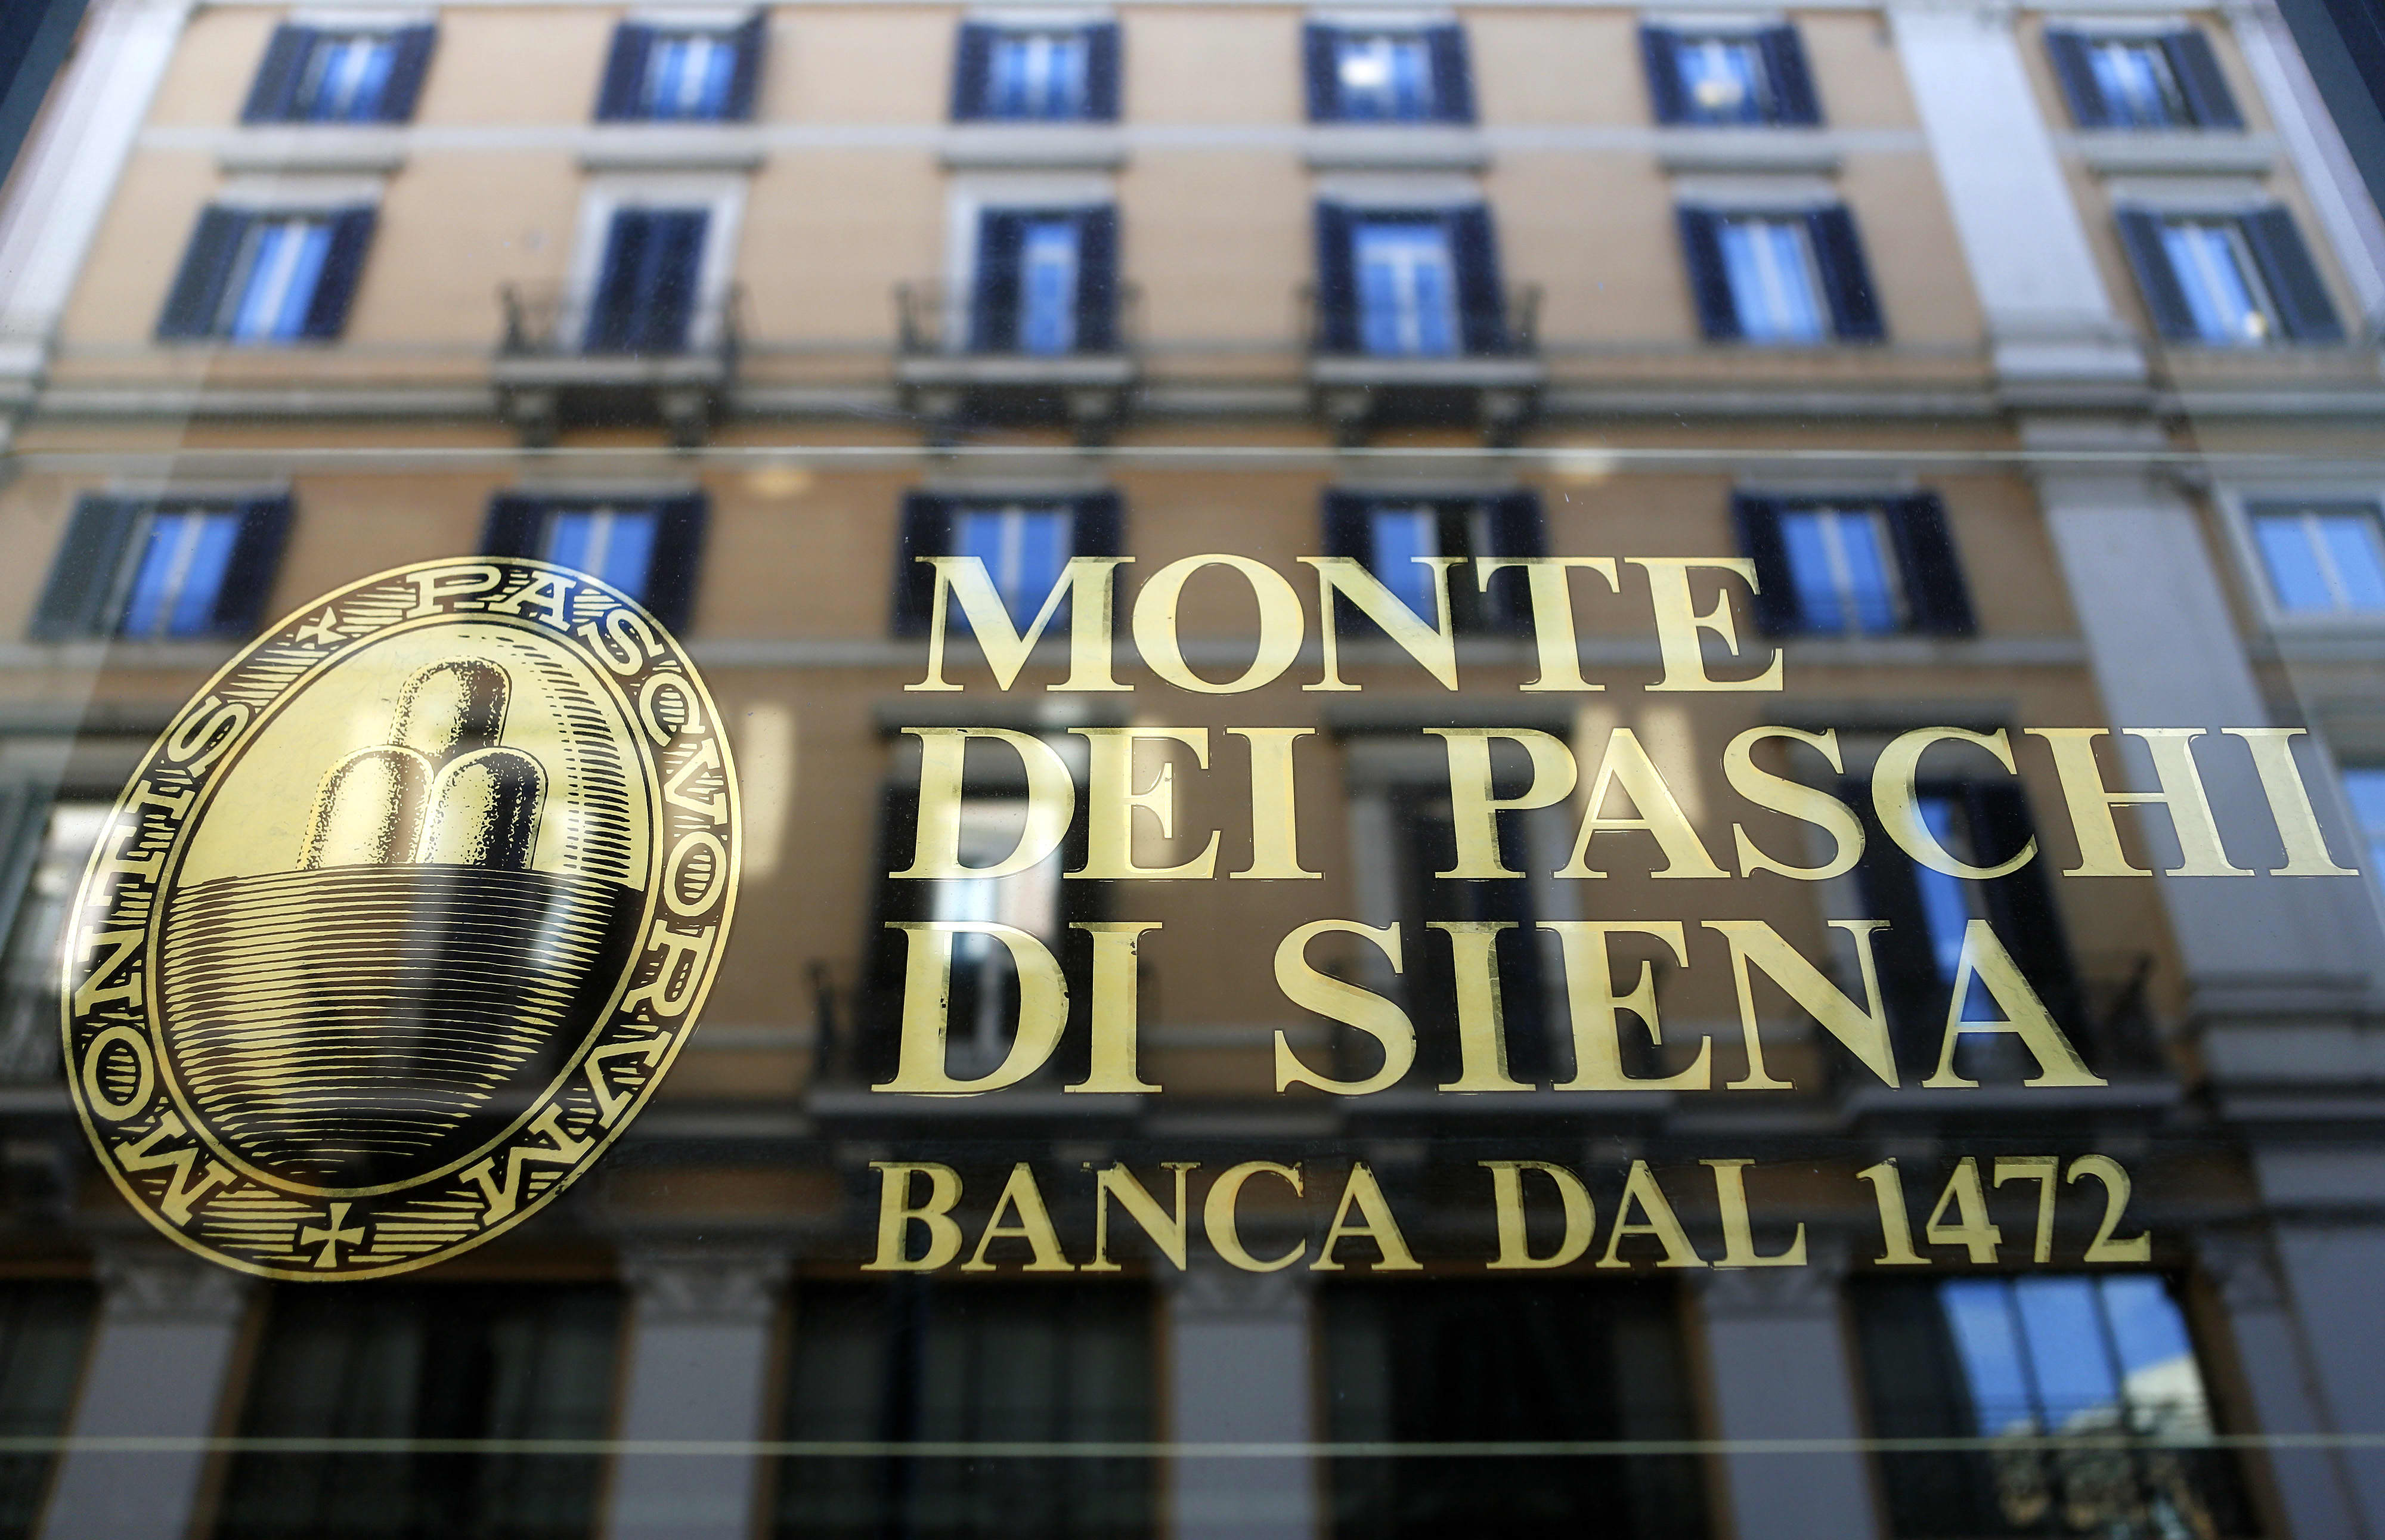 Draghi S New Powers Under Monte Paschi Spotlight